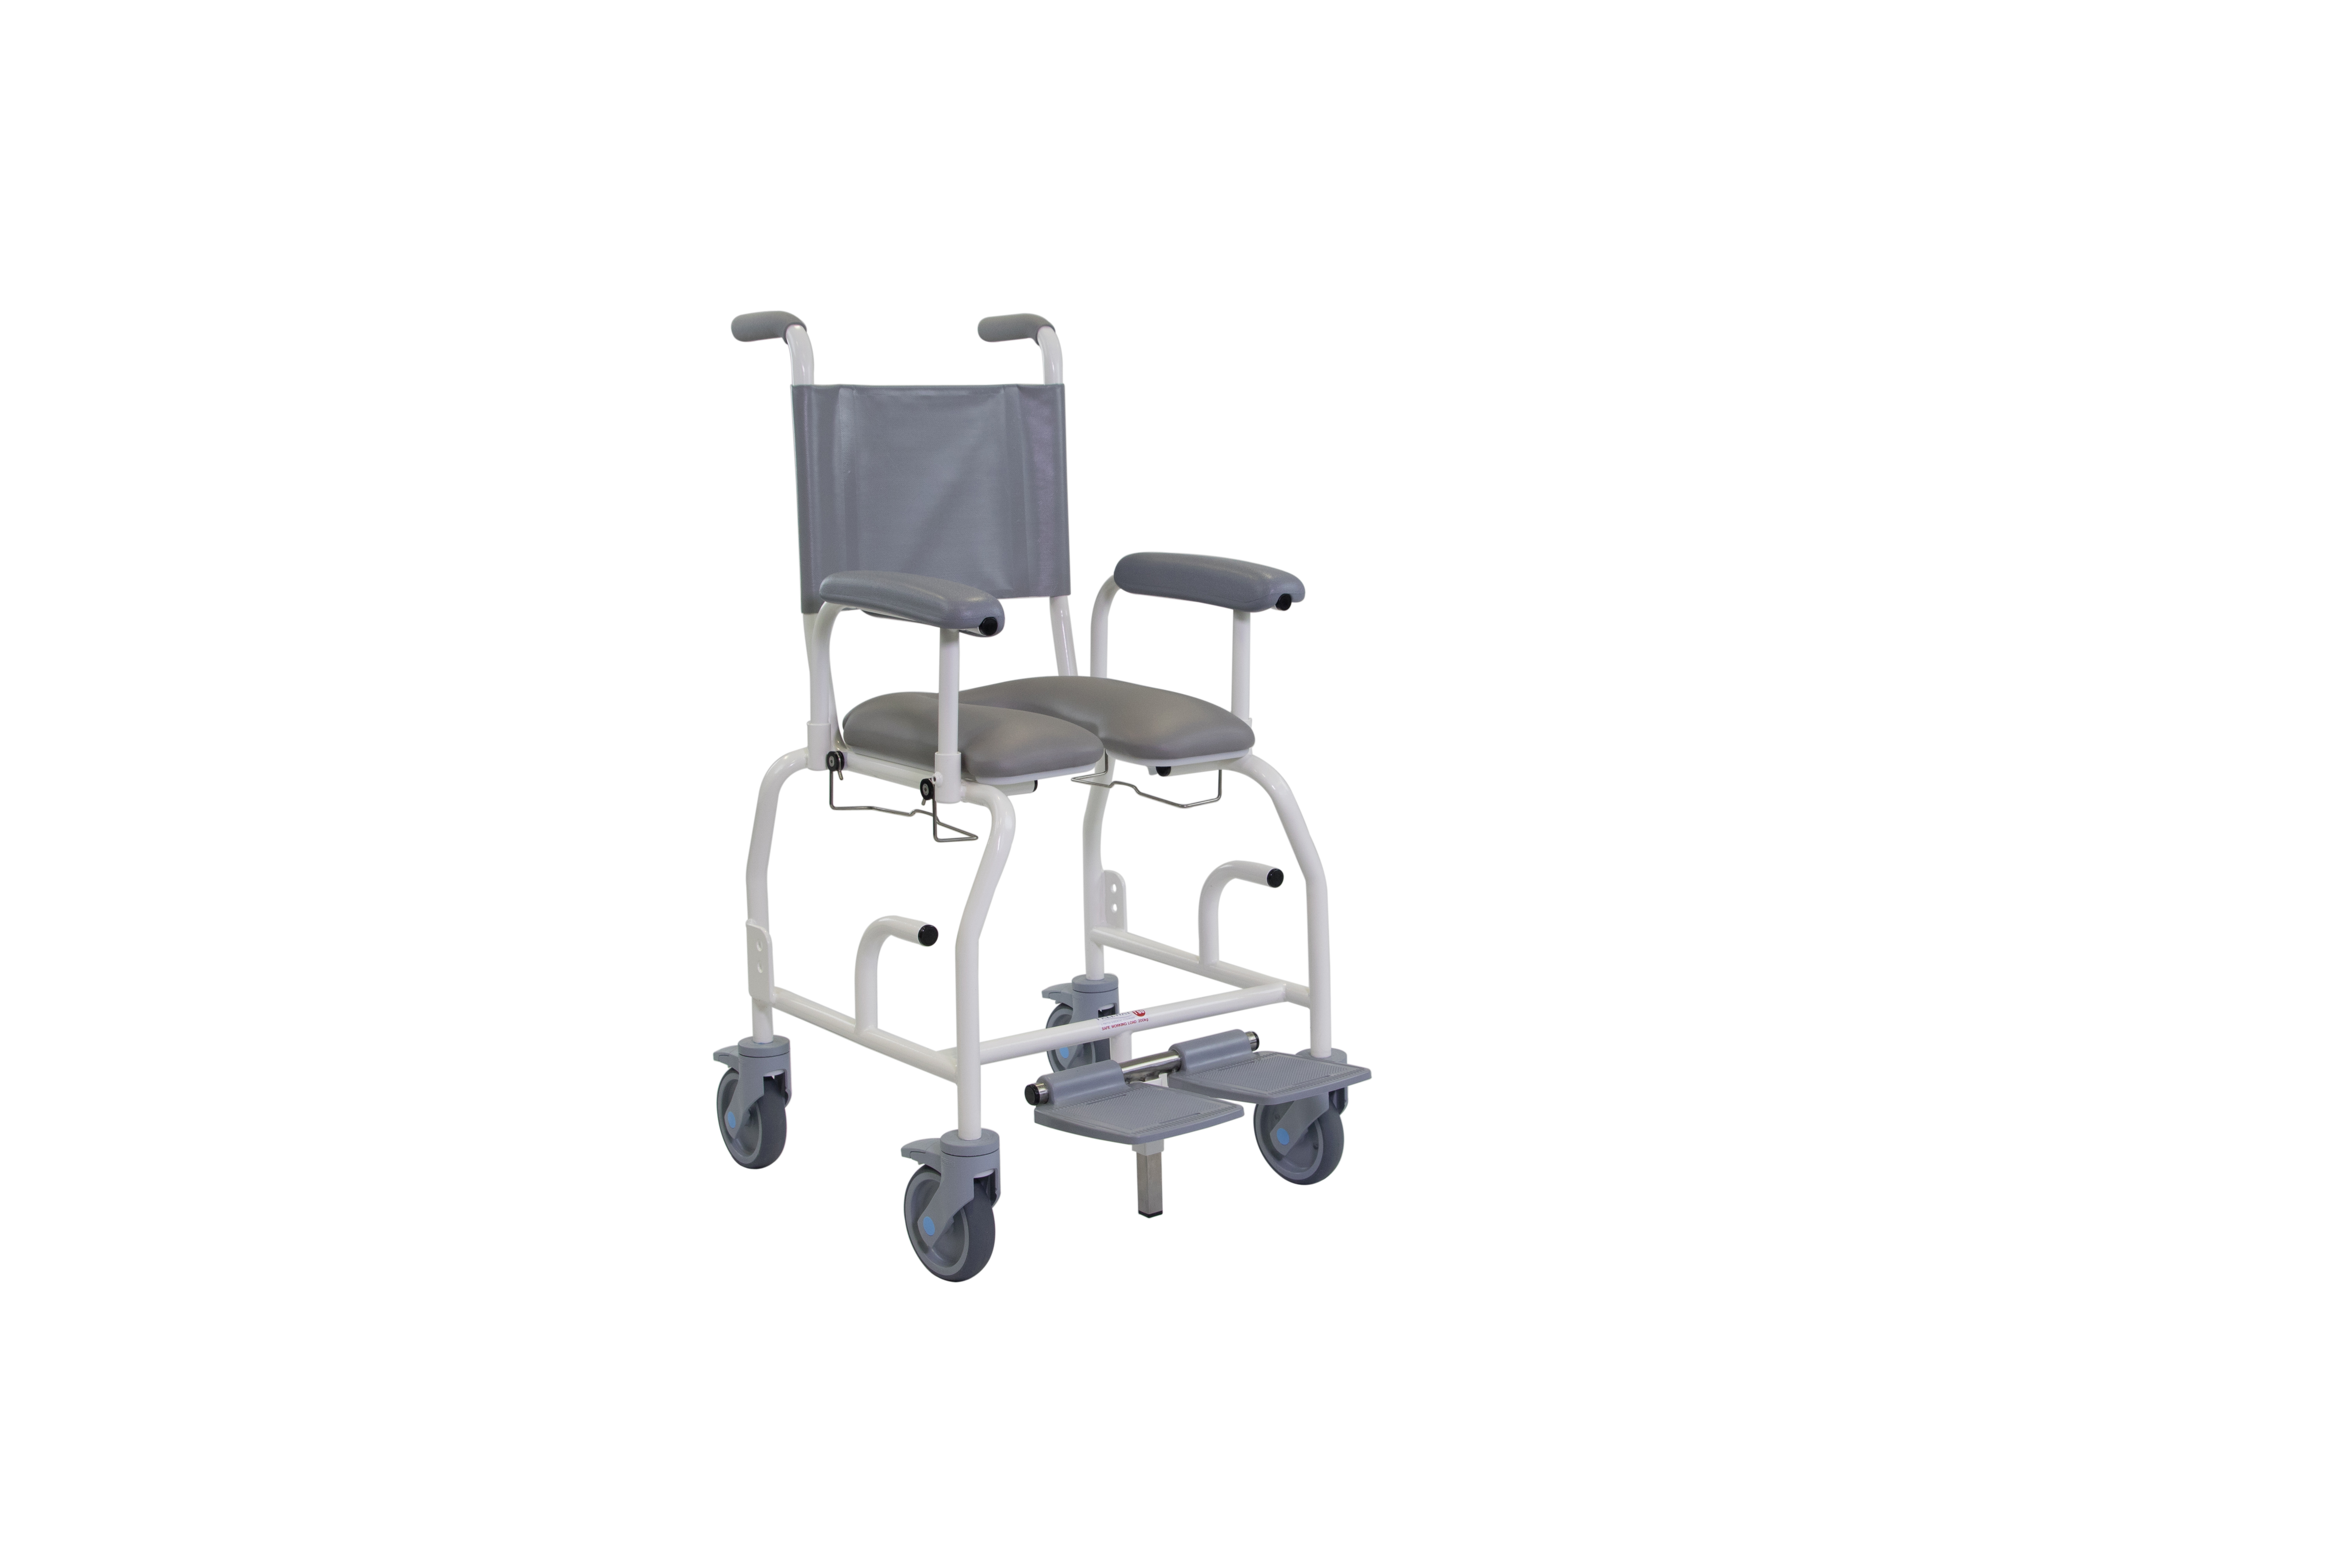 Freeway T90 paediatric shower, toilet or commode chair